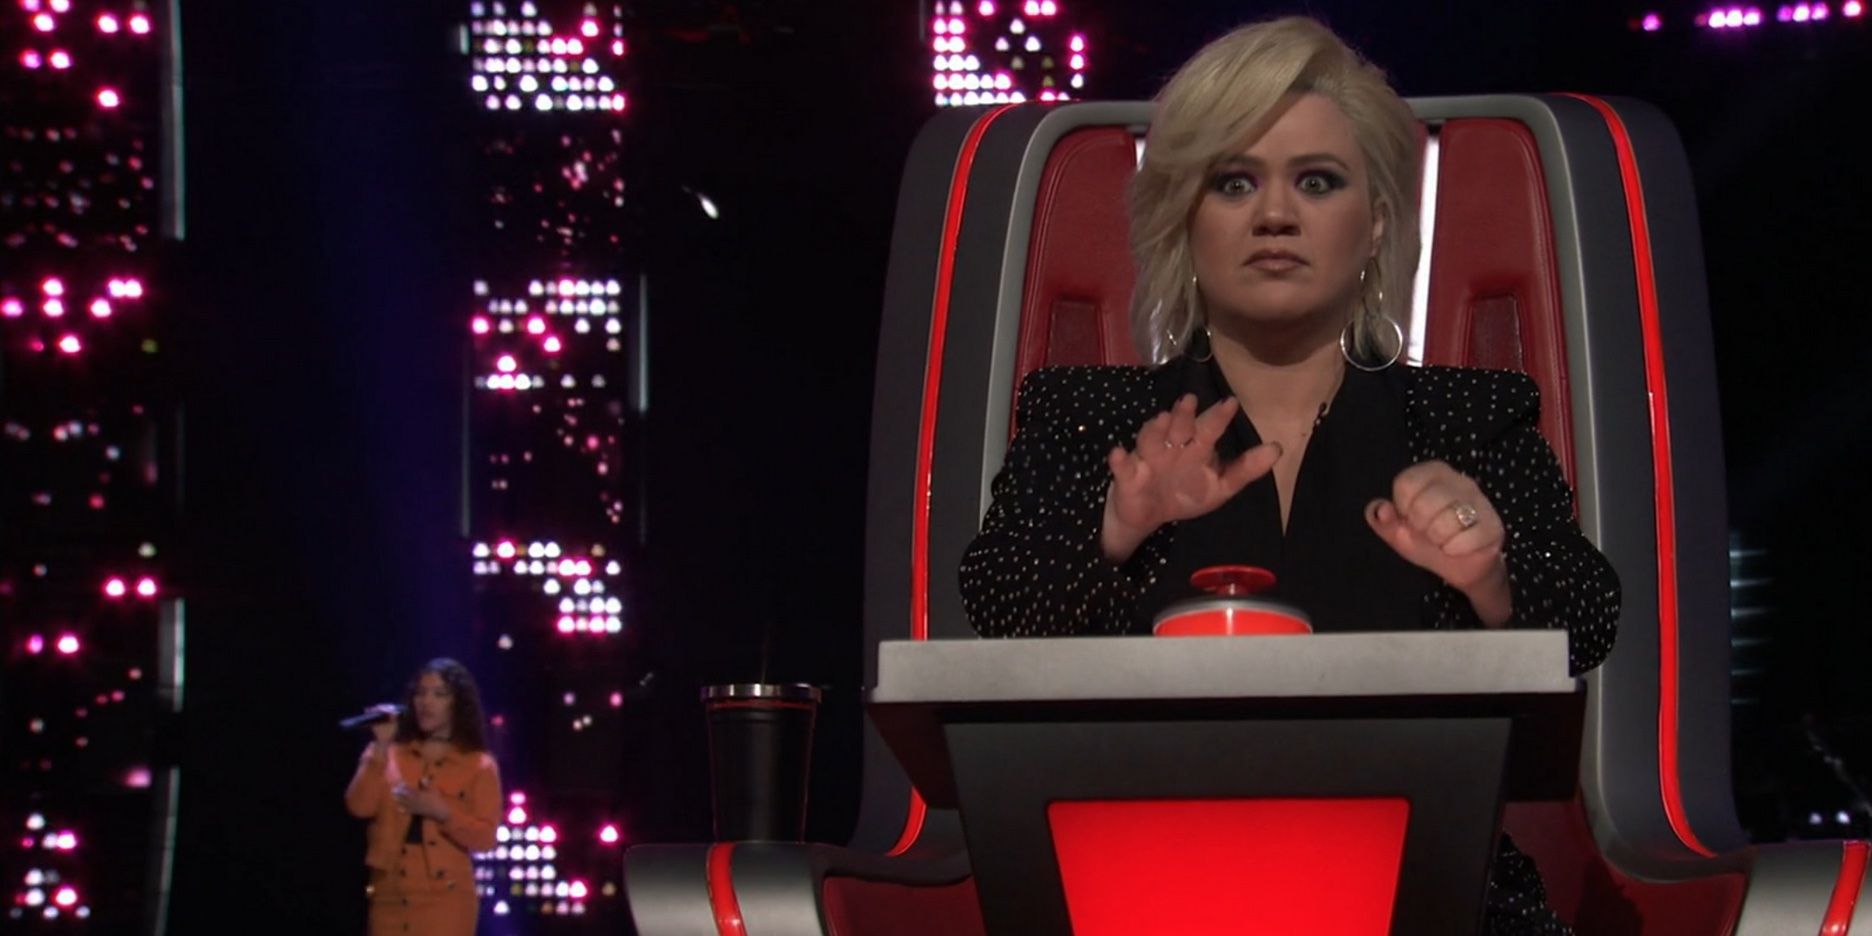 Kelly Clarkson sitting in a chair while a woman sings behind her on 'The Voice'